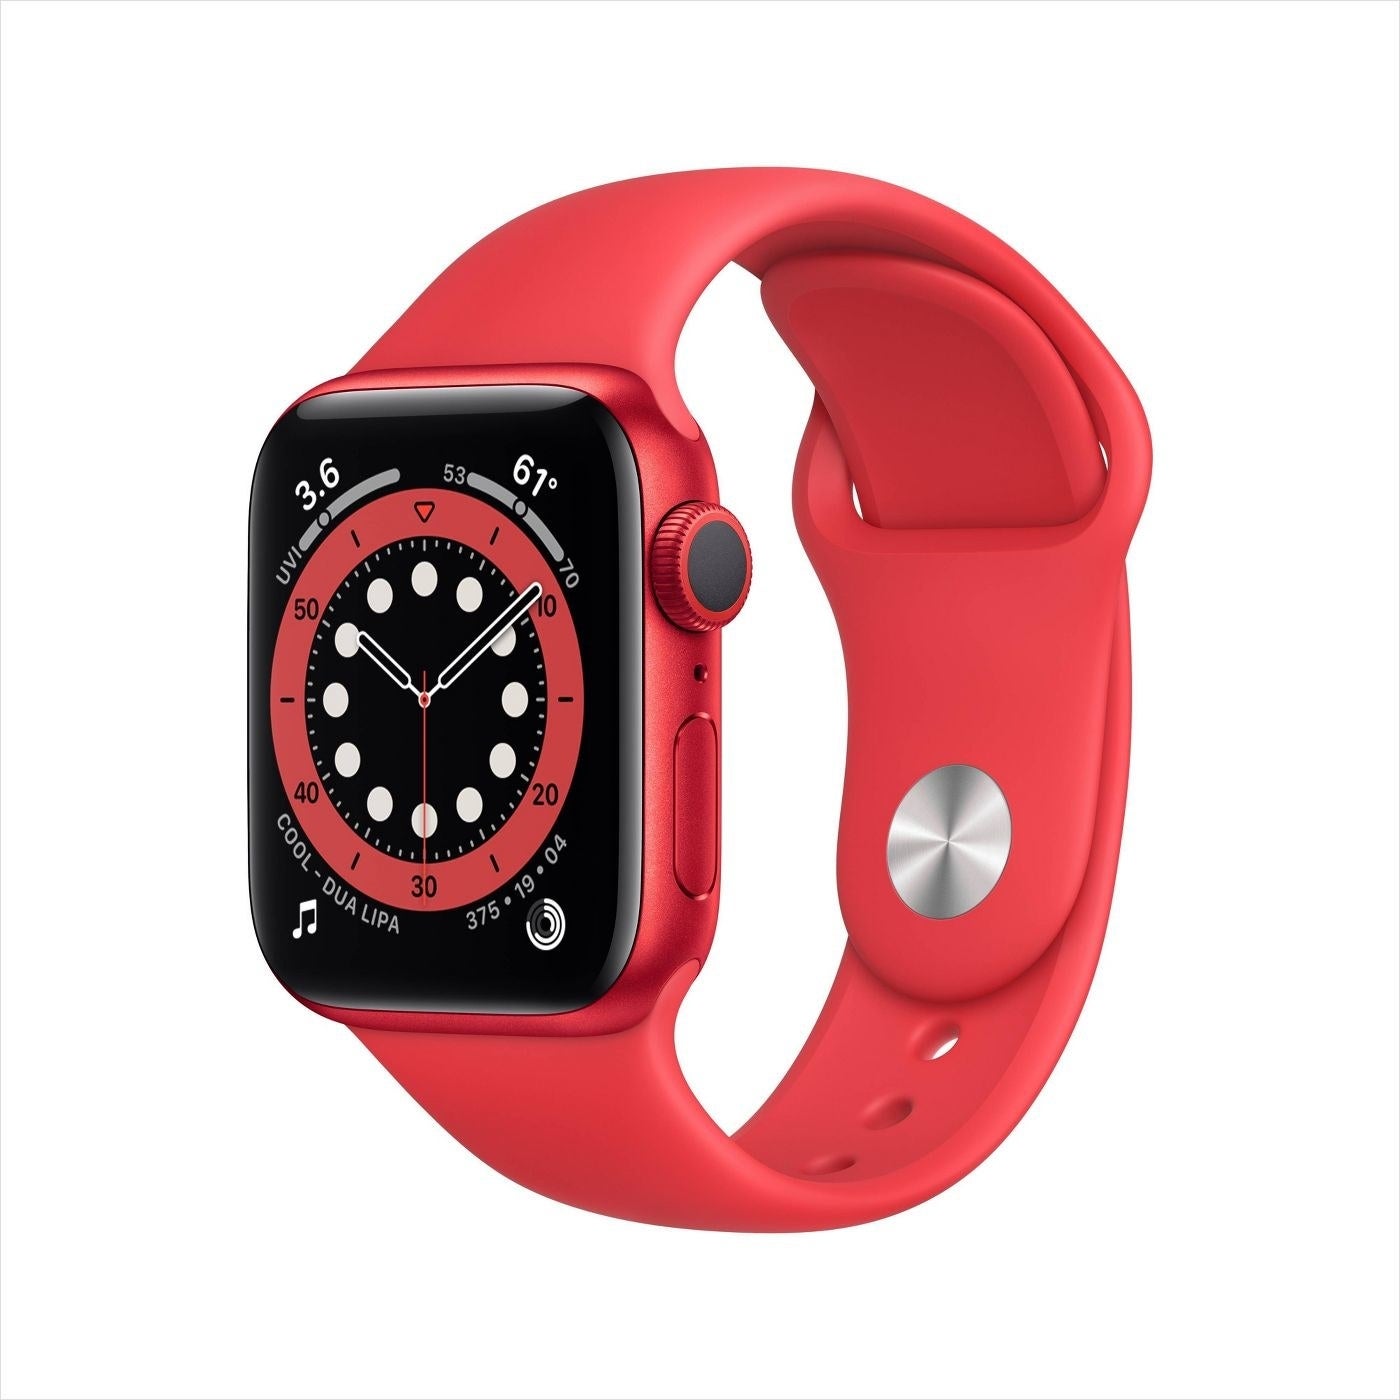 the watch in red